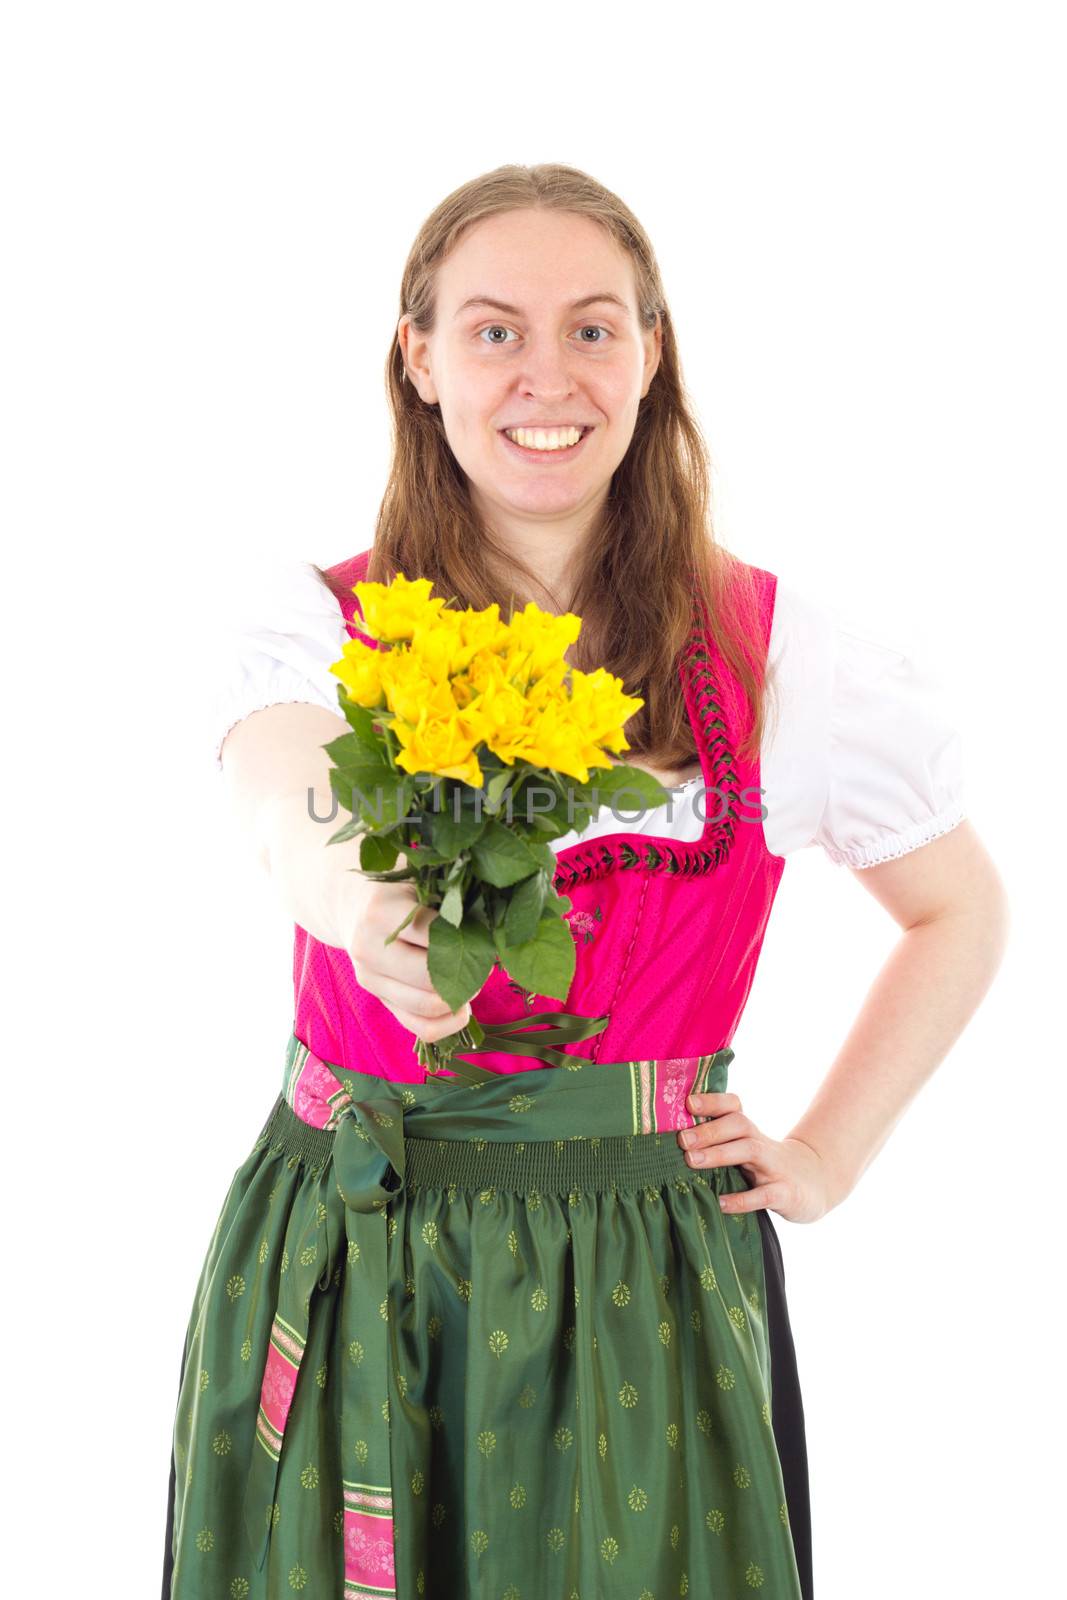 Happy woman in dirndl giving you roses as present